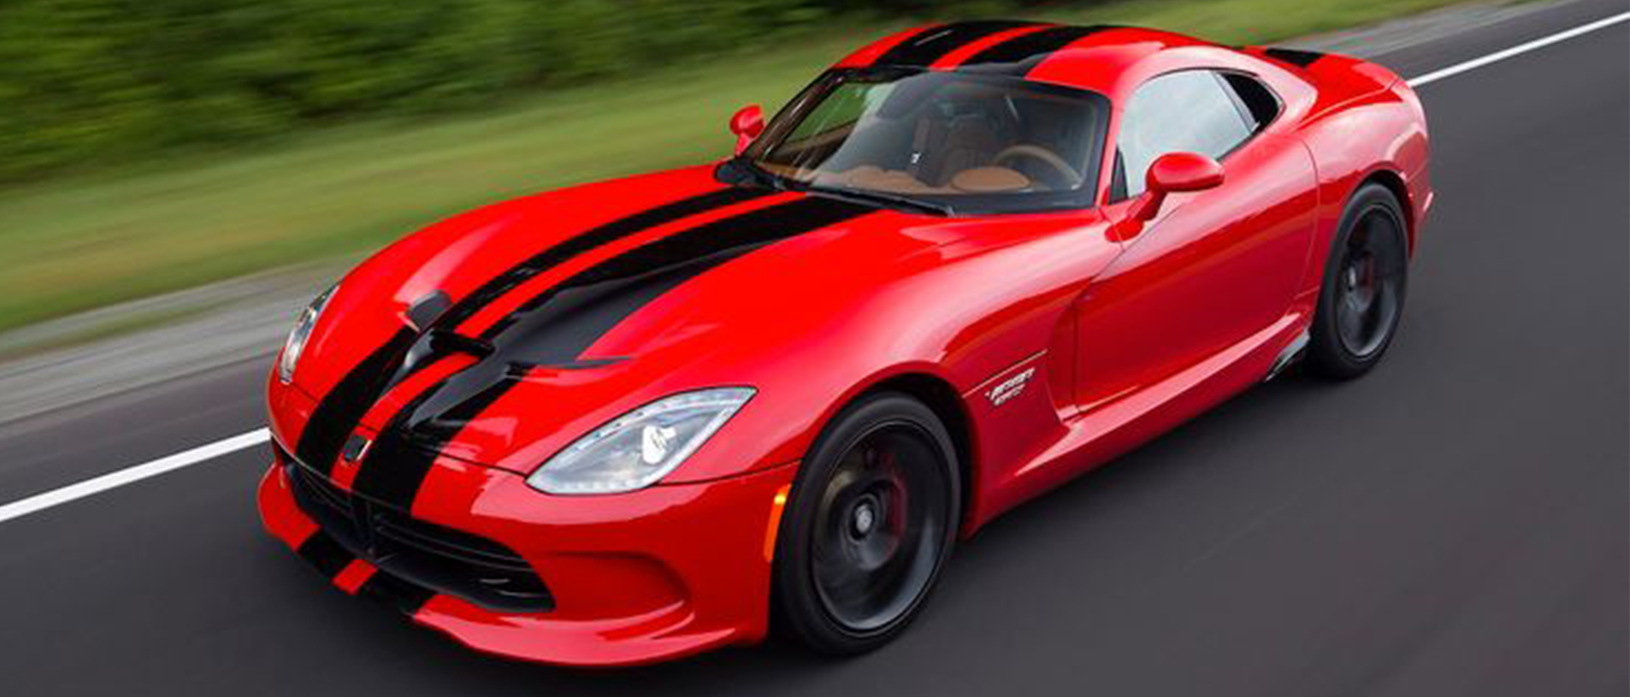 The Dodge Viper Knew How to Switch It Up